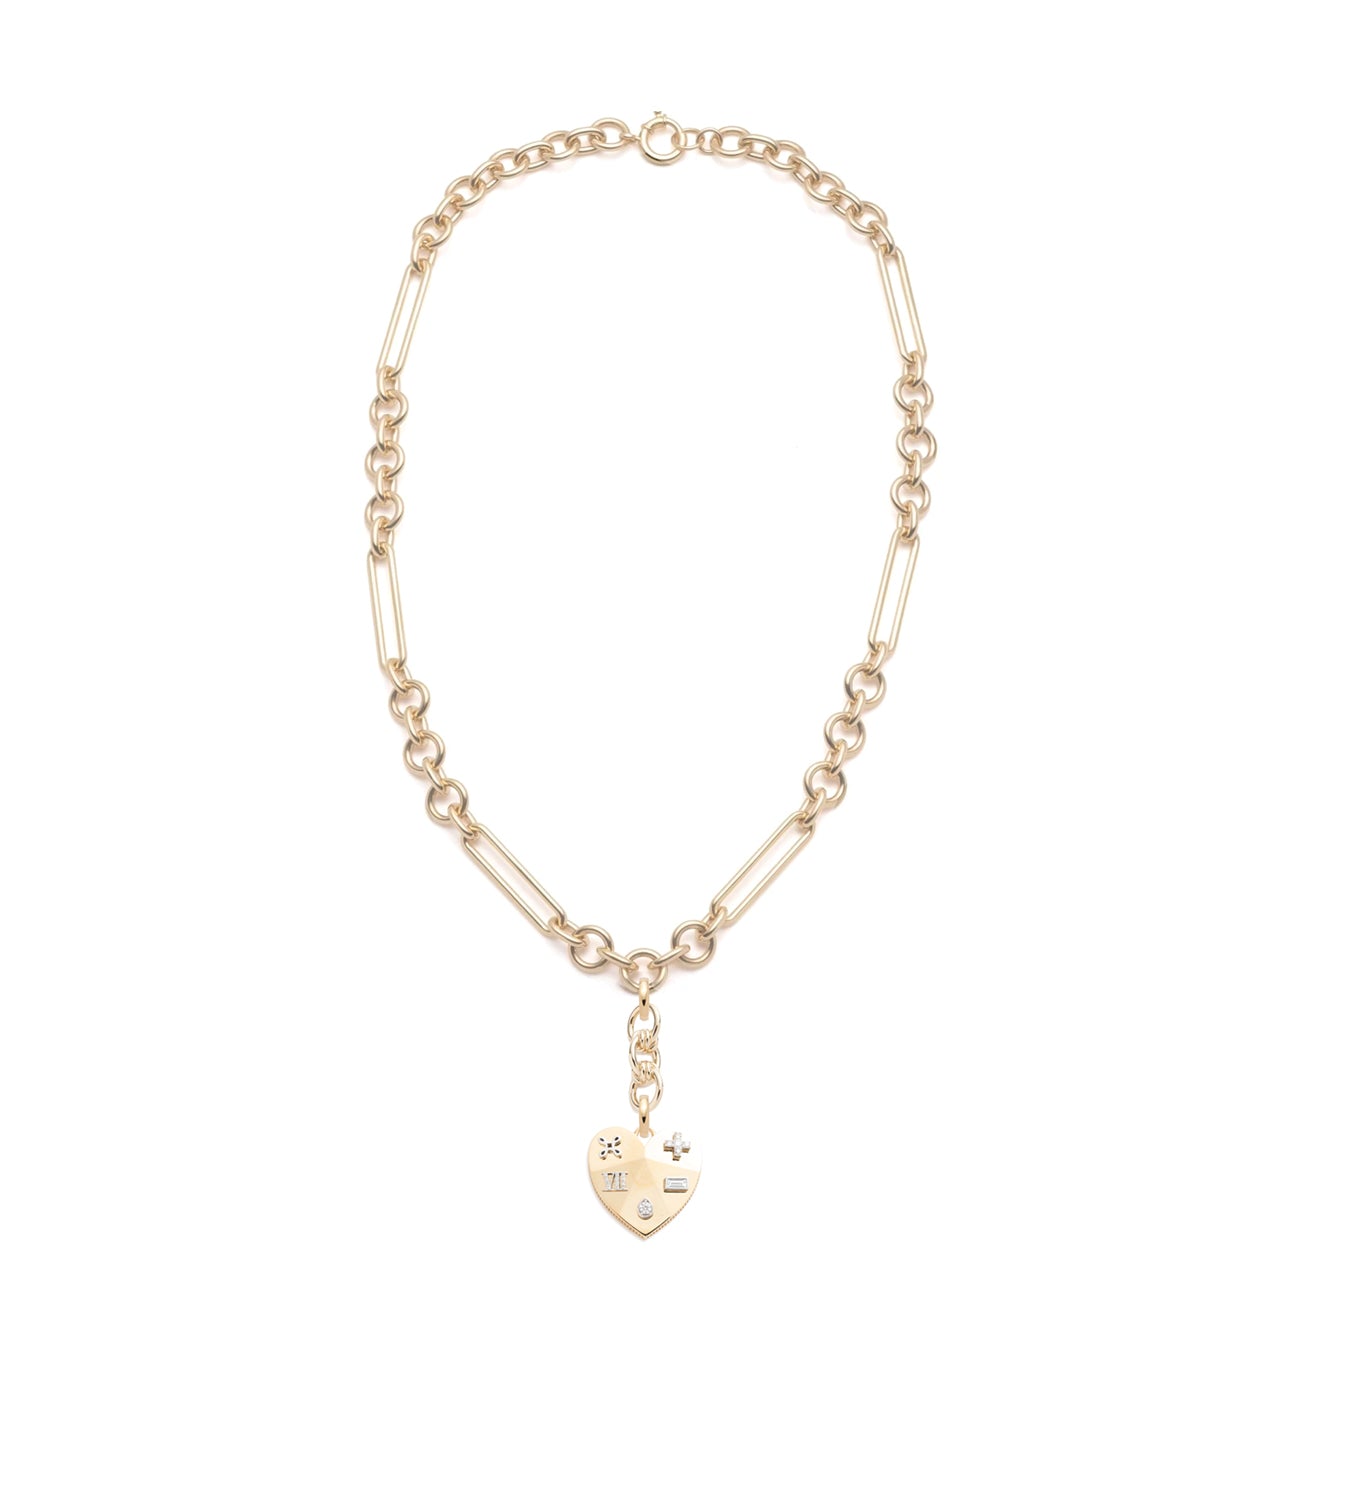 Ever Growing Love - Vivacity : Facets of Love Midsize Mixed Clip Chain Necklace